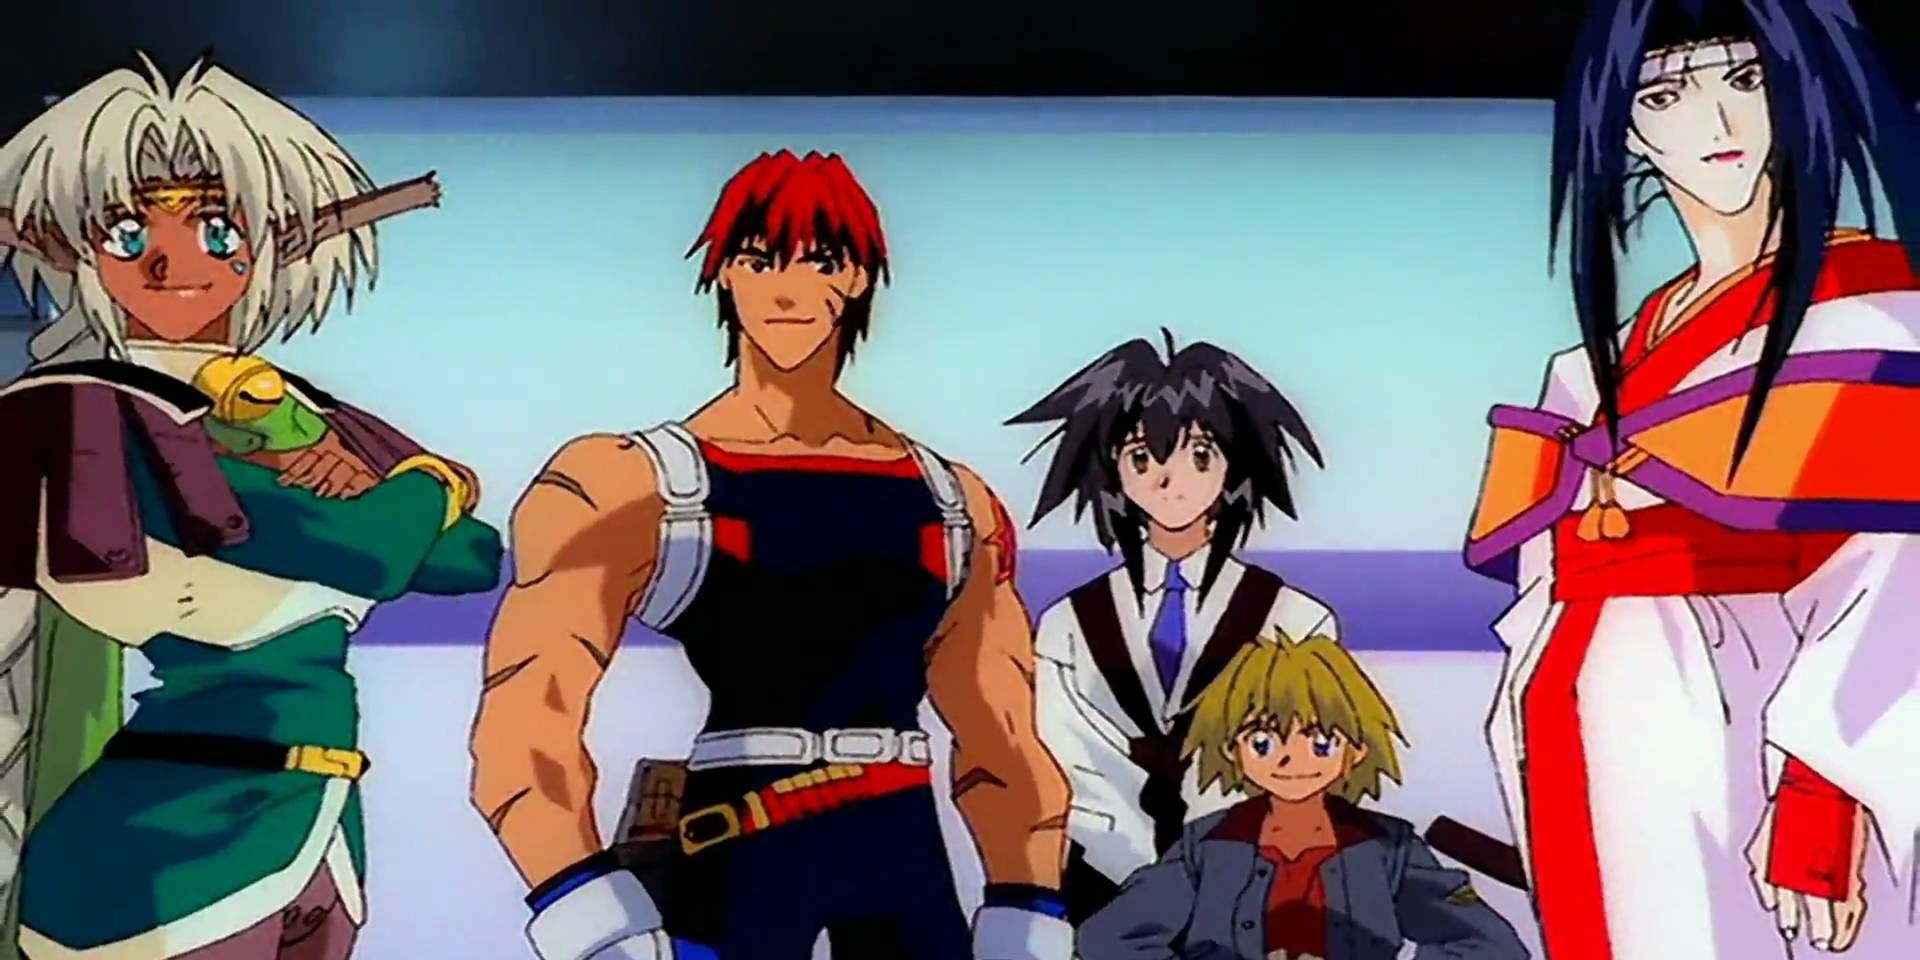 Gene Starwind with his crew on the ship in Outlaw Star